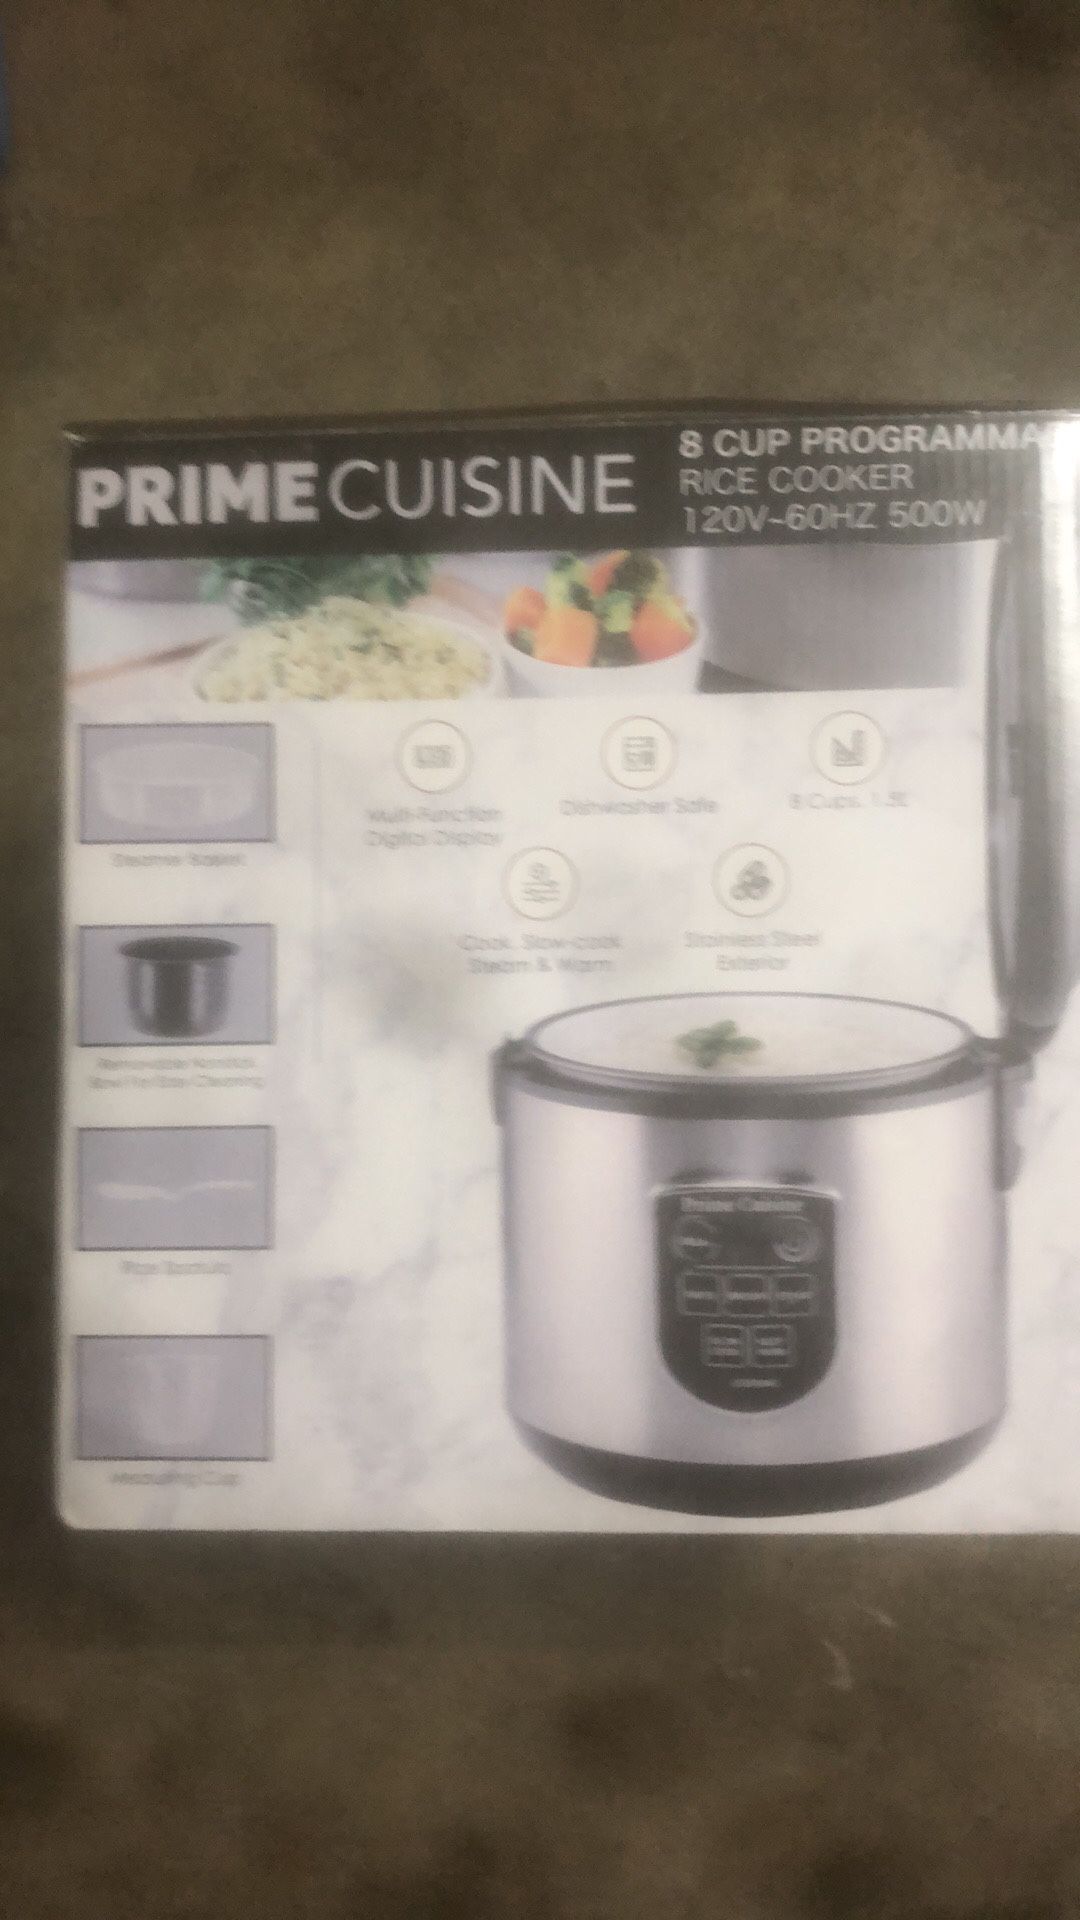 Aroma 10 Cup Stainless Rice Cooker for Sale in Lomita, CA - OfferUp